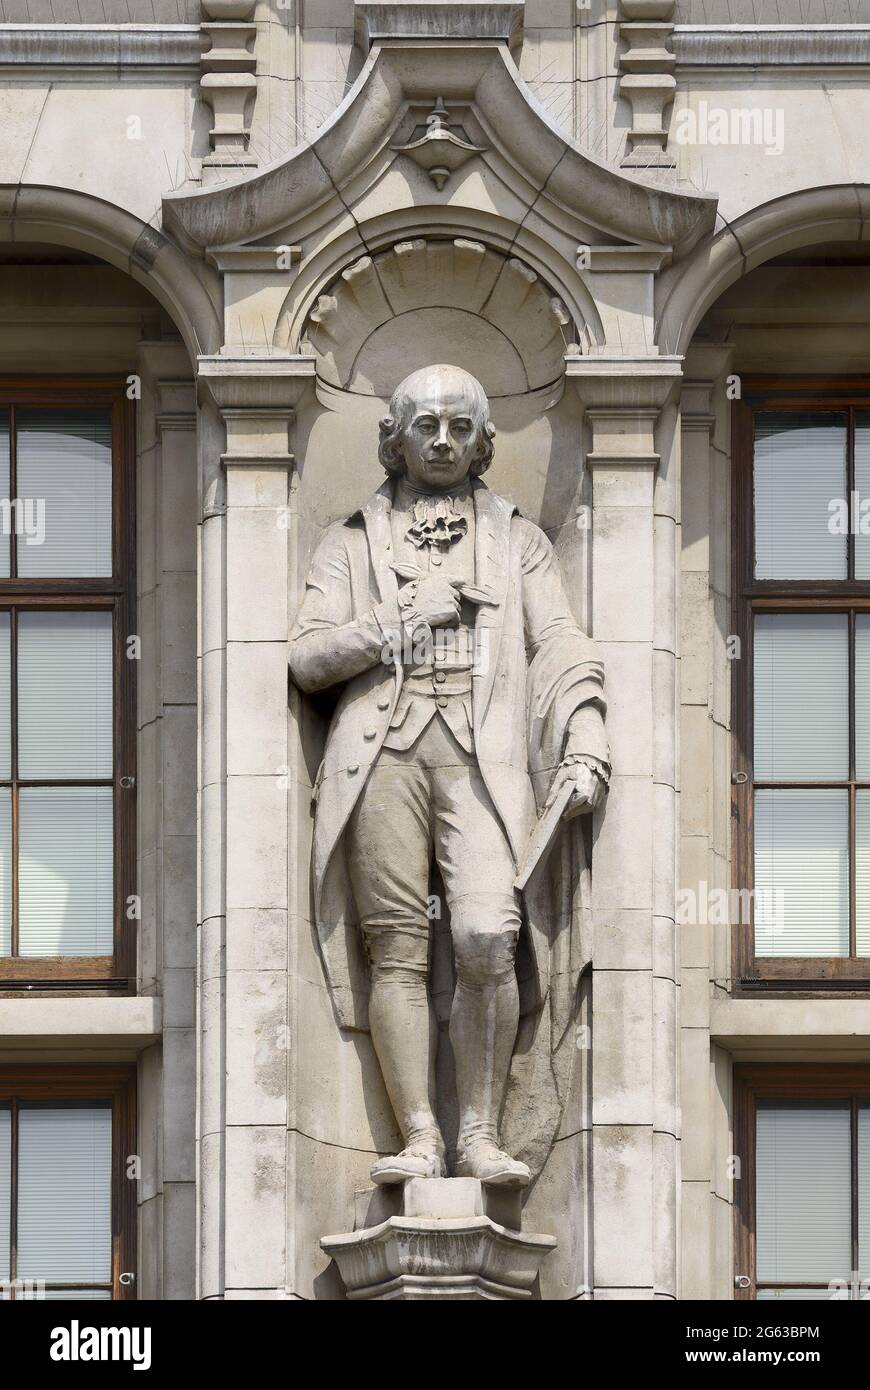 London, England, UK. Statue of John Flaxman (sculptor) by A. Bertram Pegram, on the Cromwell Road facade of the Victoria and Albert Museum, Kensington Stock Photo